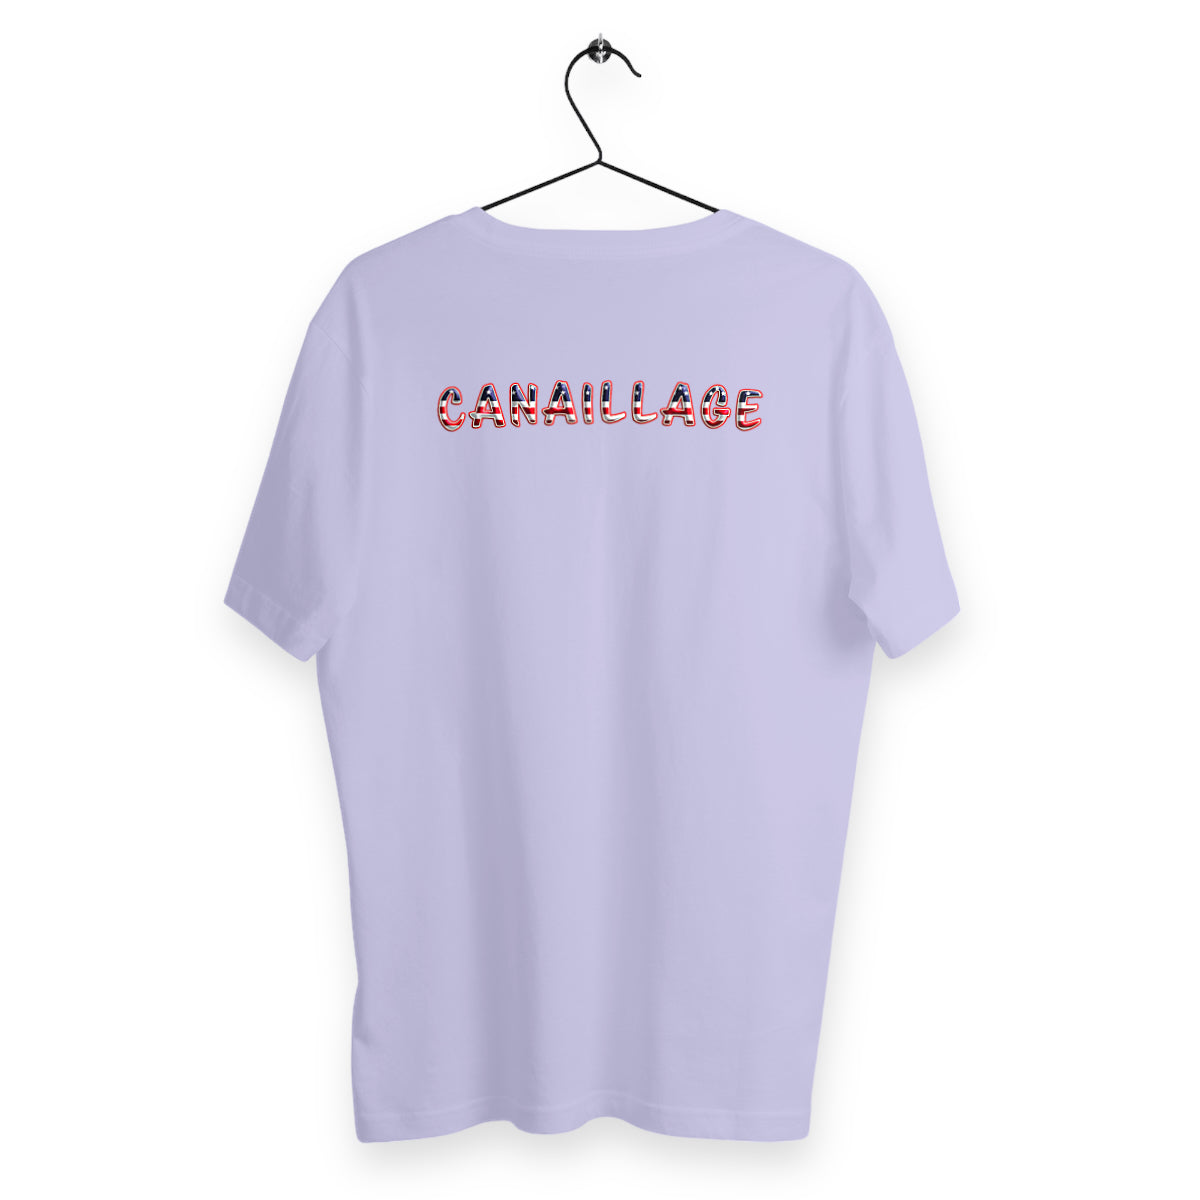 T-shirt homme canaillage USA